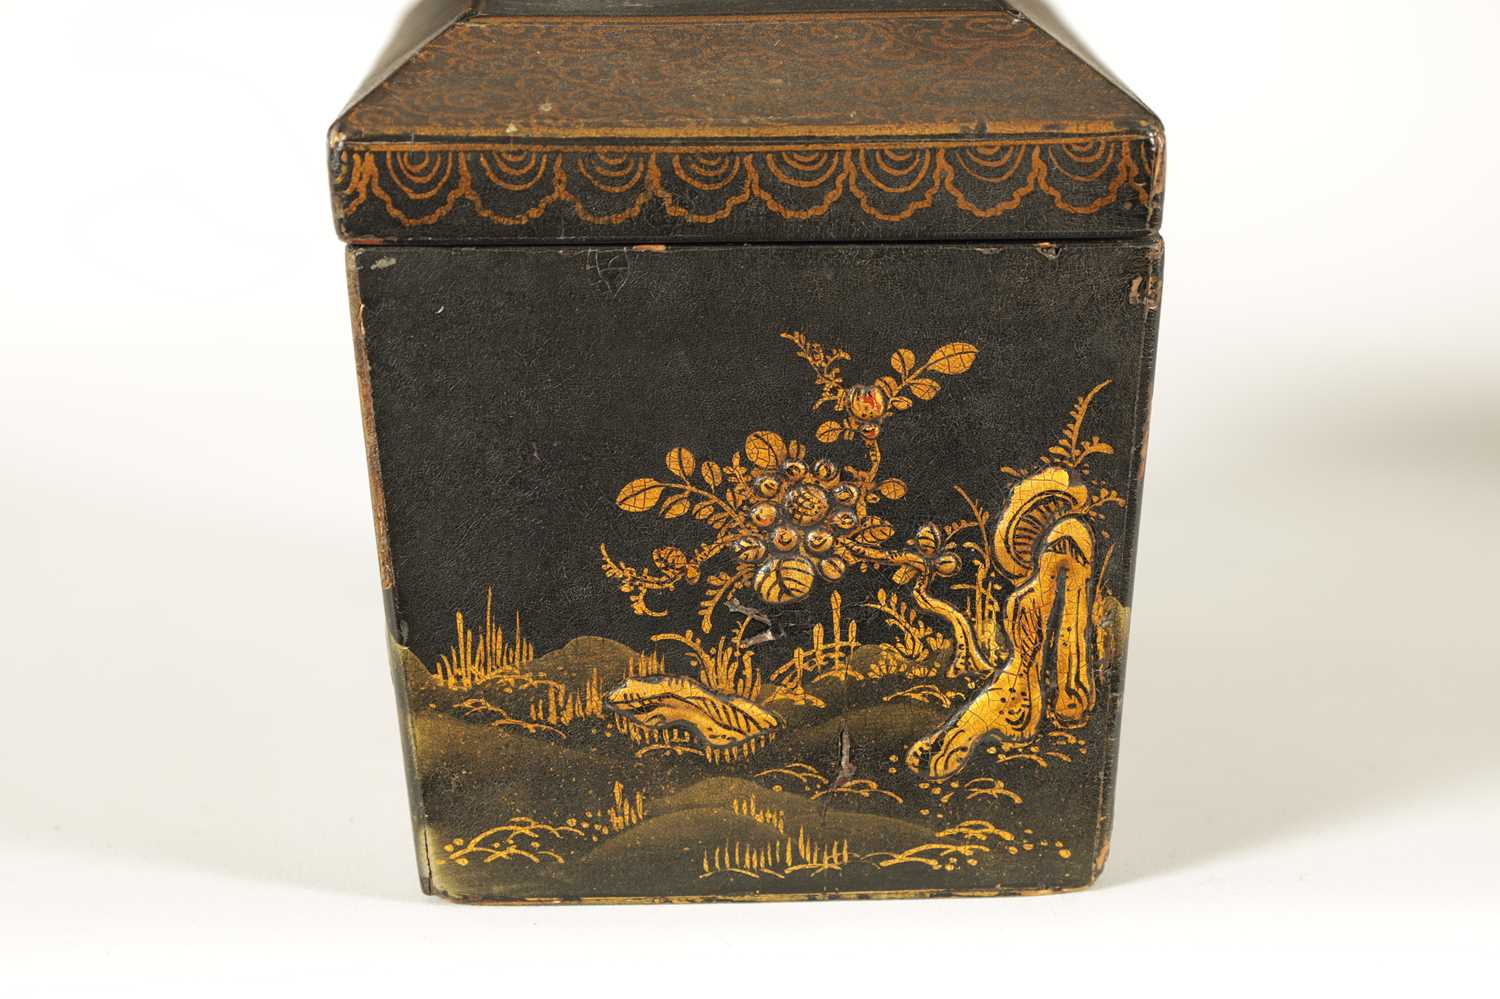 A LATE GEORGIAN BLACK LACQUER AND CHINOISERRIE SARCOPHAGUS TEA CADDY - Image 10 of 16